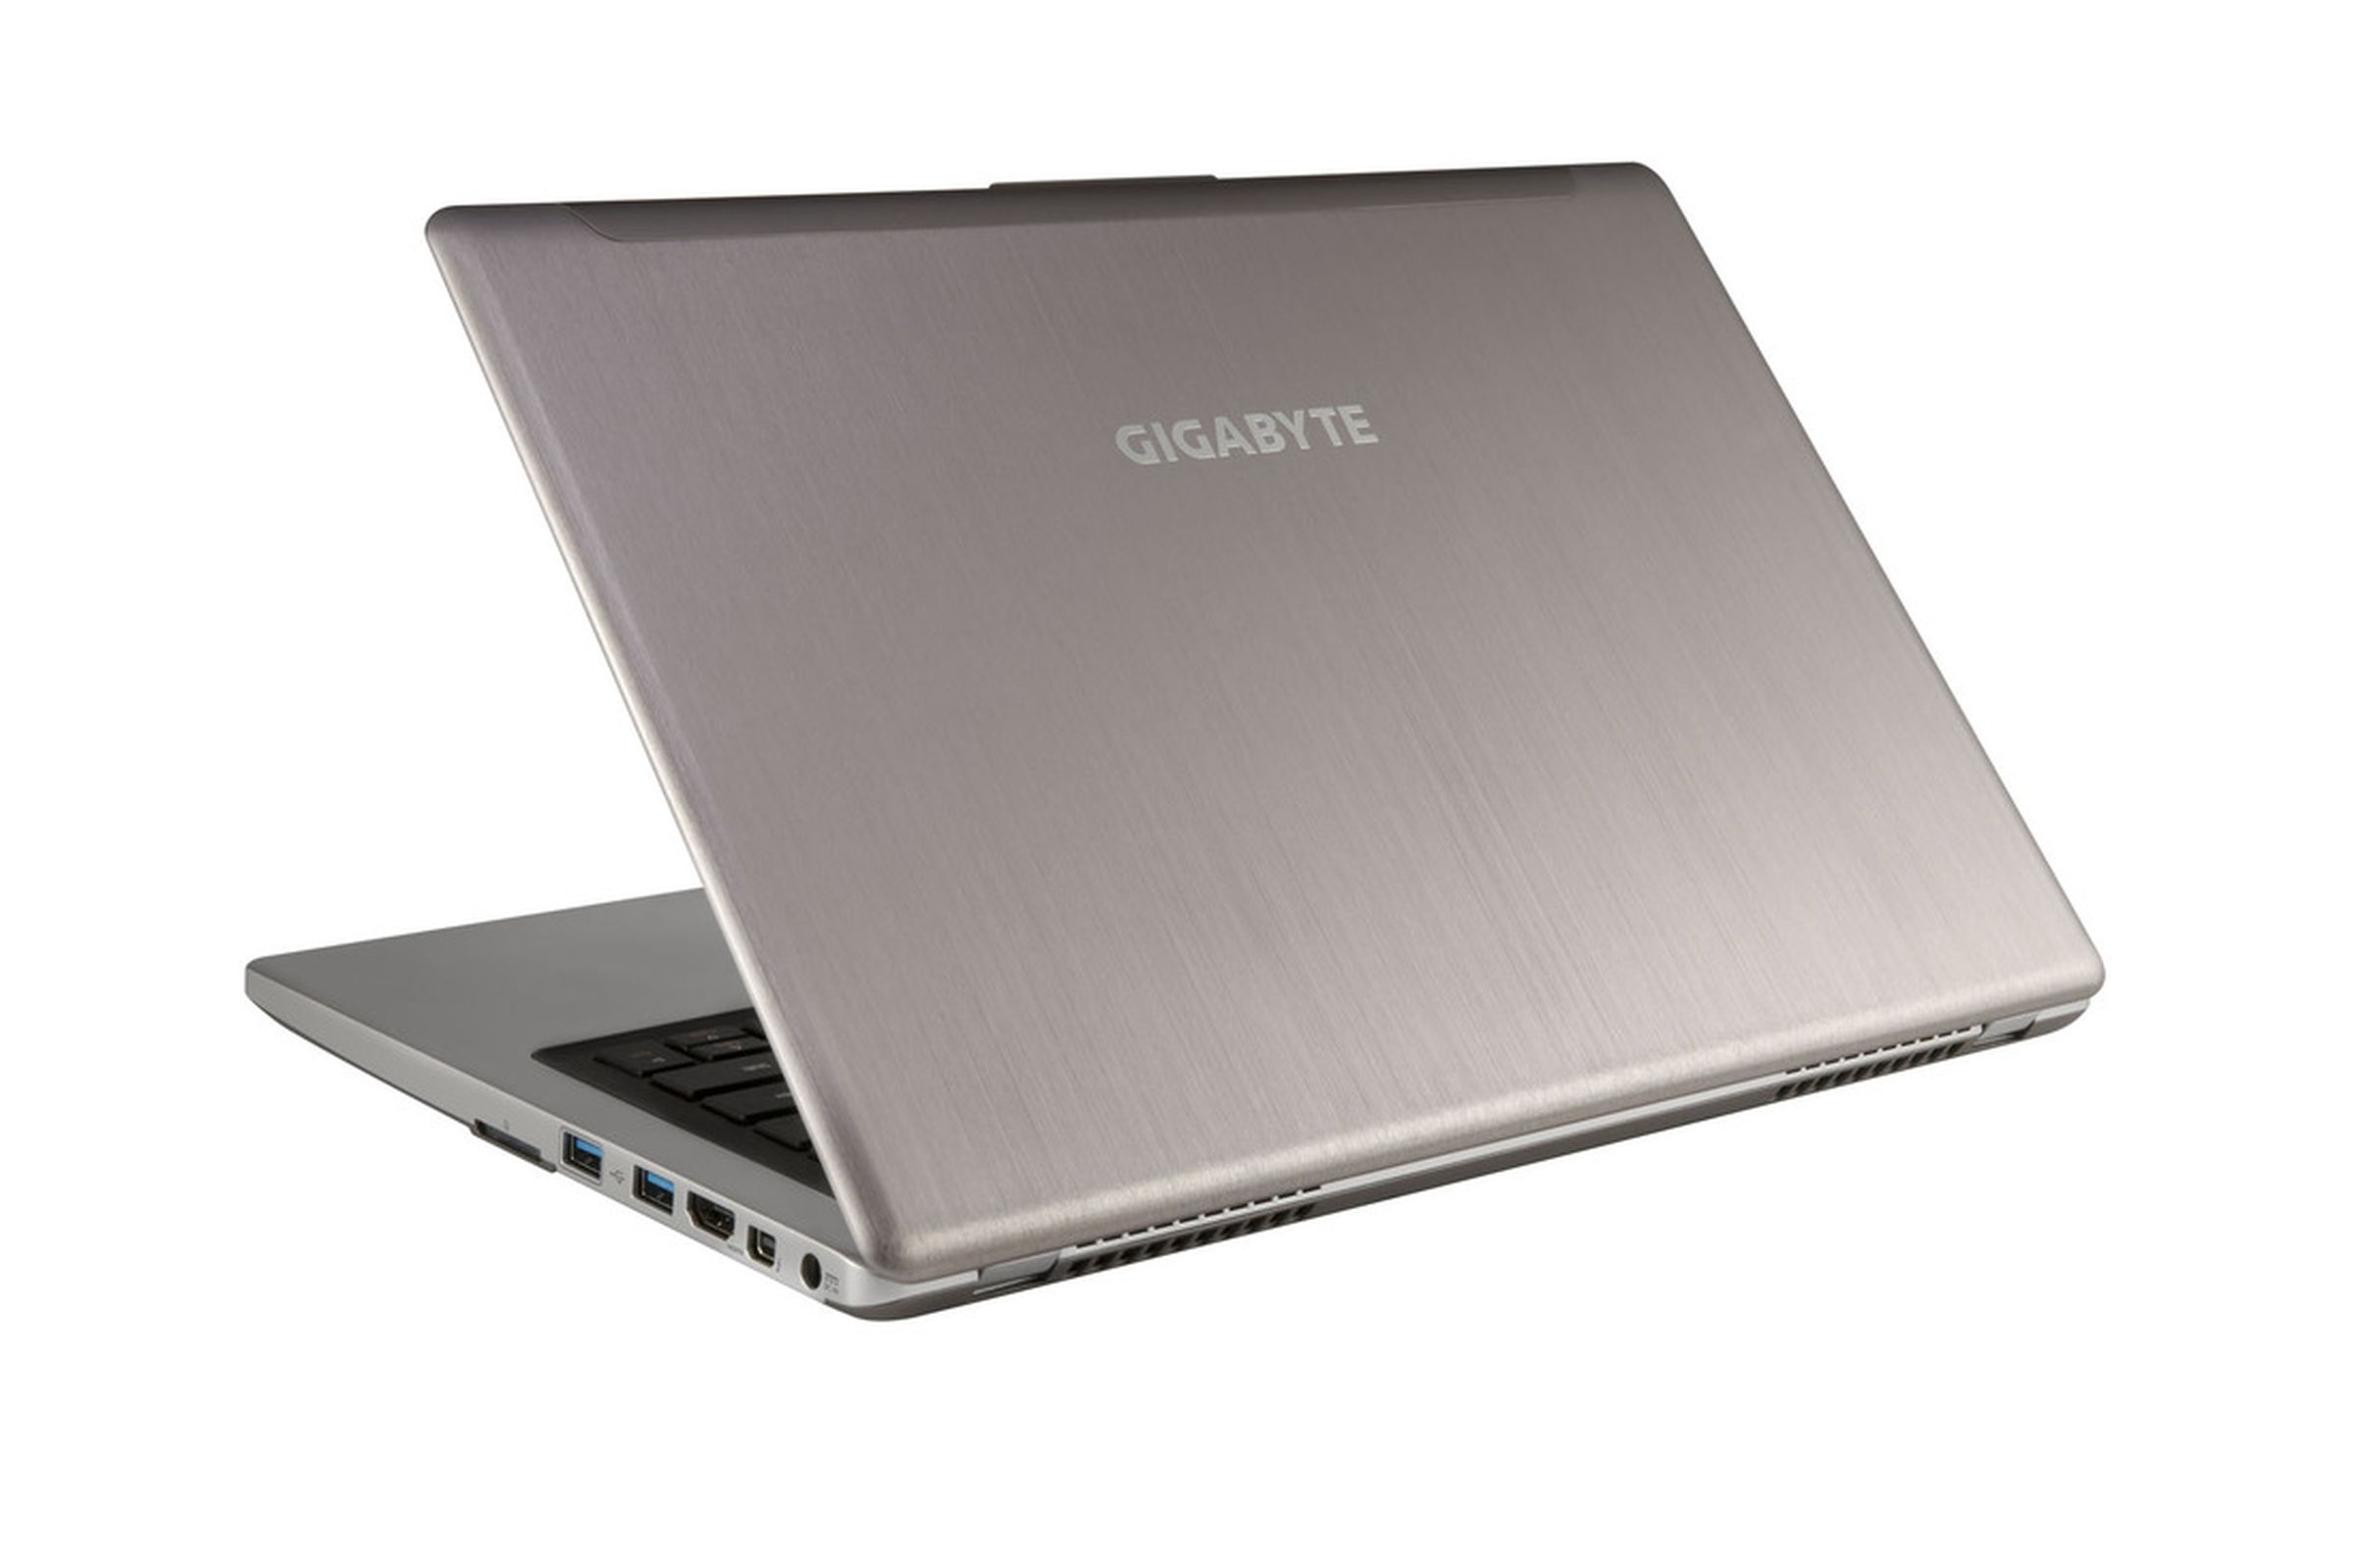 Gigabyte U2442 ultrabook and P2542G gaming notebook press images